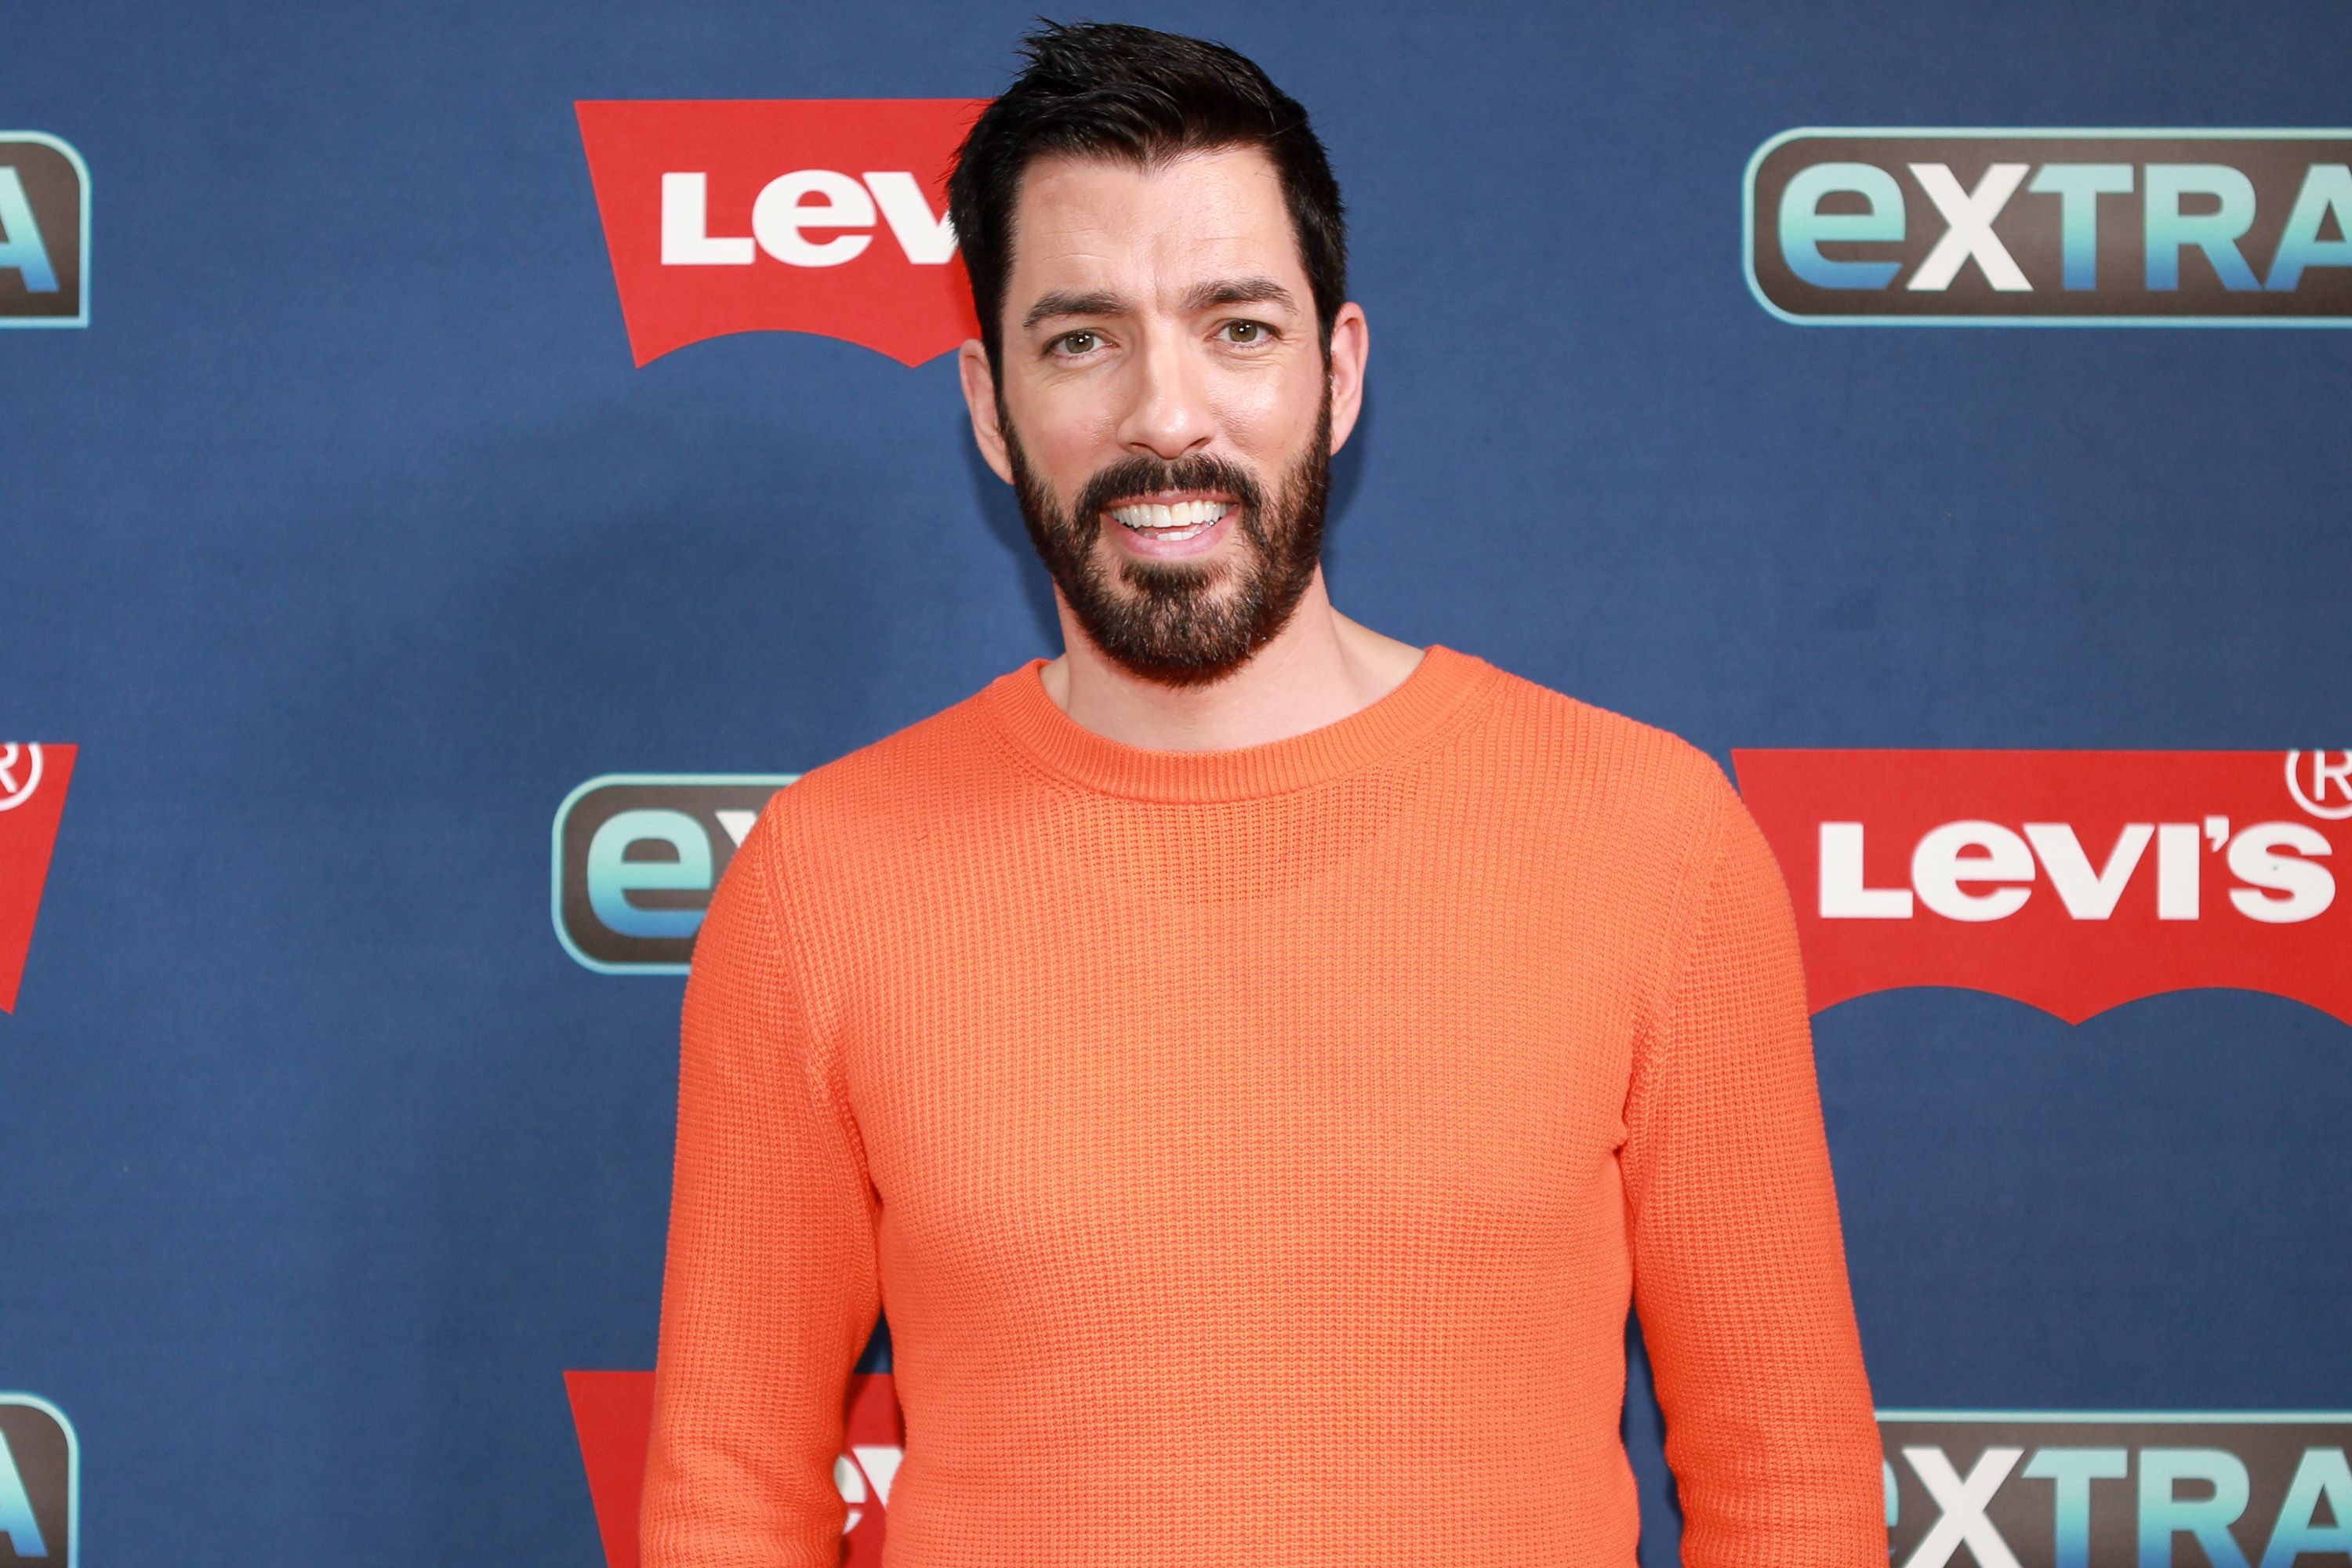 Jonathan Scott at The Levi's Store in New York City on September 10, 2019 | Getty Images